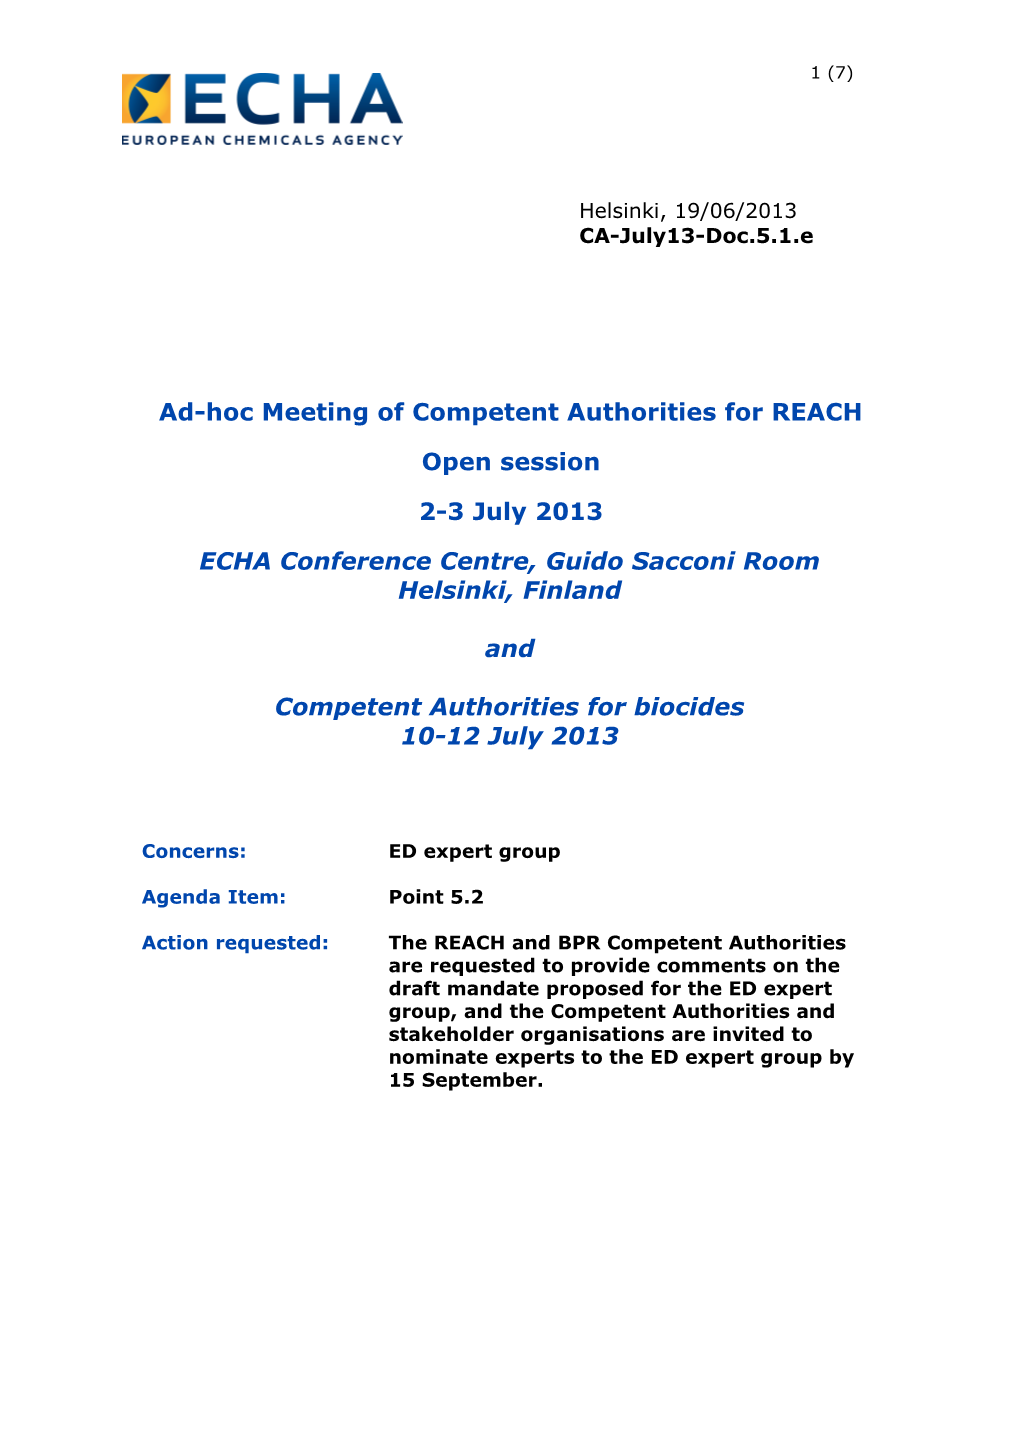 Ad-Hoc Meeting of Competent Authorities for REACH